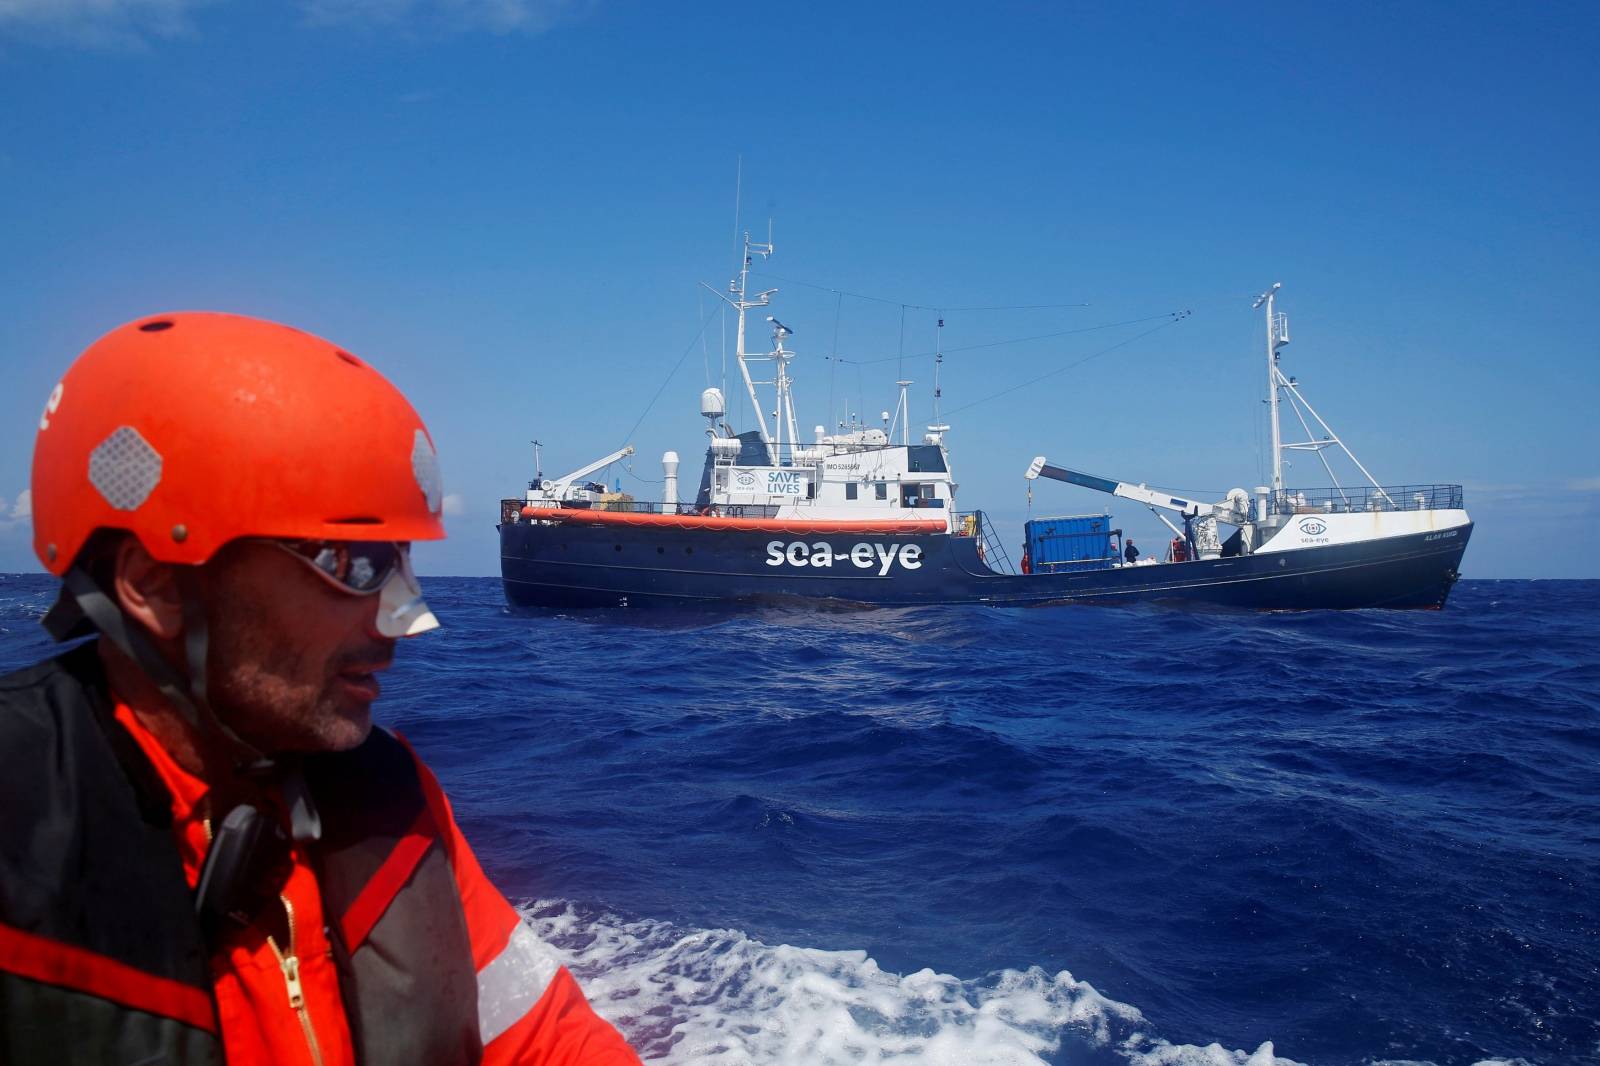 FILE PHOTO: Crew member of the German NGO Sea-Eye migrant rescue ship 'Alan Kurdi' takes part in a training exercise while on their way to the search and rescue zone off the North African coast, in the western Mediterranean Sea